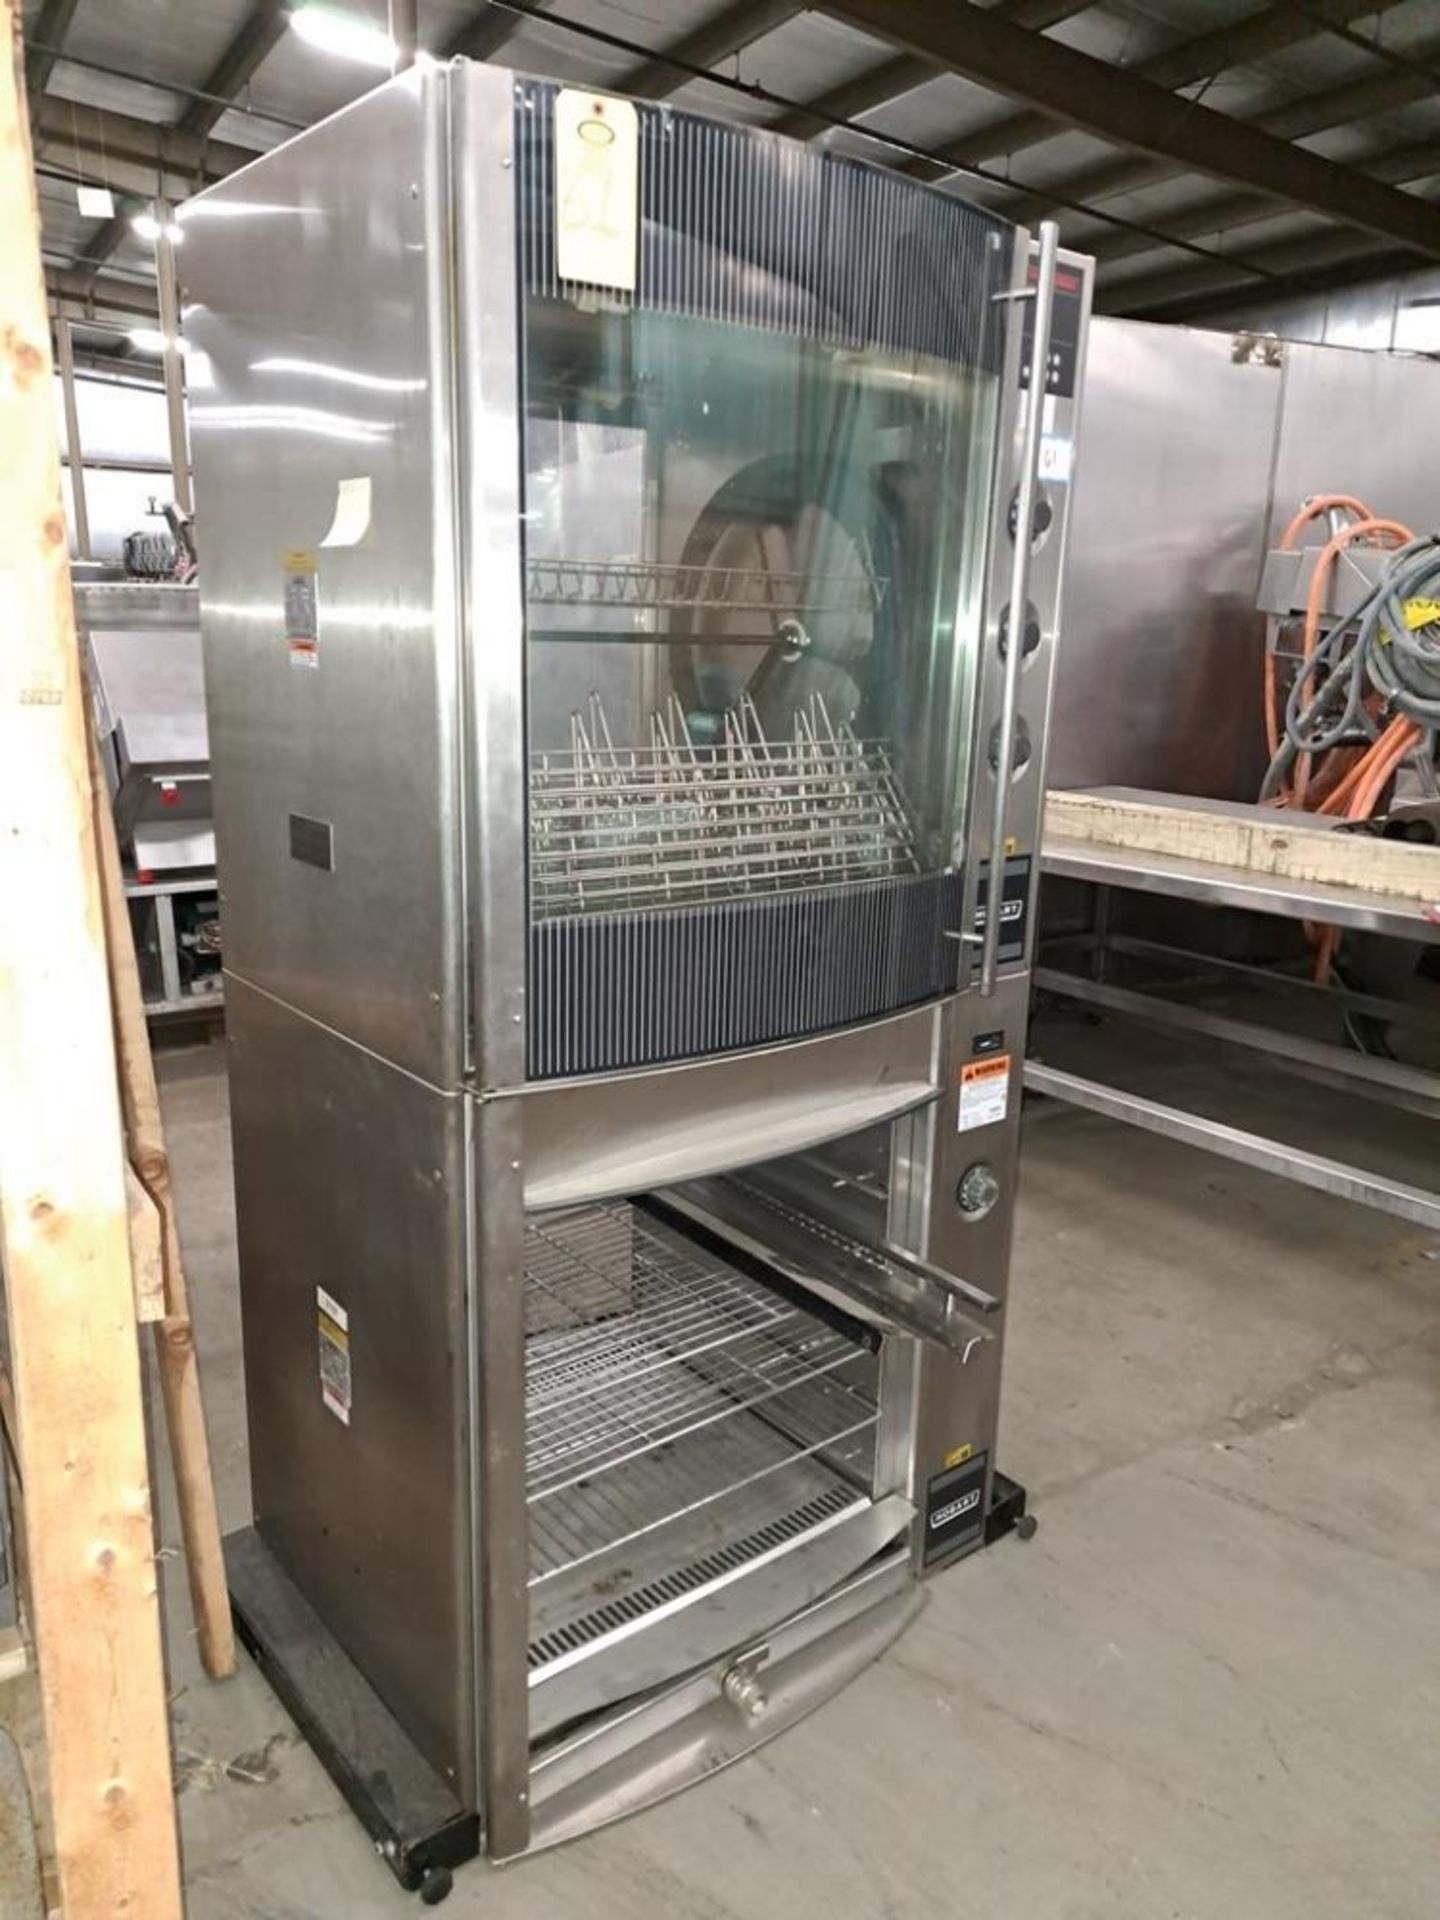 Hobart Mdl. HR7 Rotisserie Oven, Ser. #750012656, 208 volts, 1/3 phase, with storage (missing glass) - Image 2 of 6